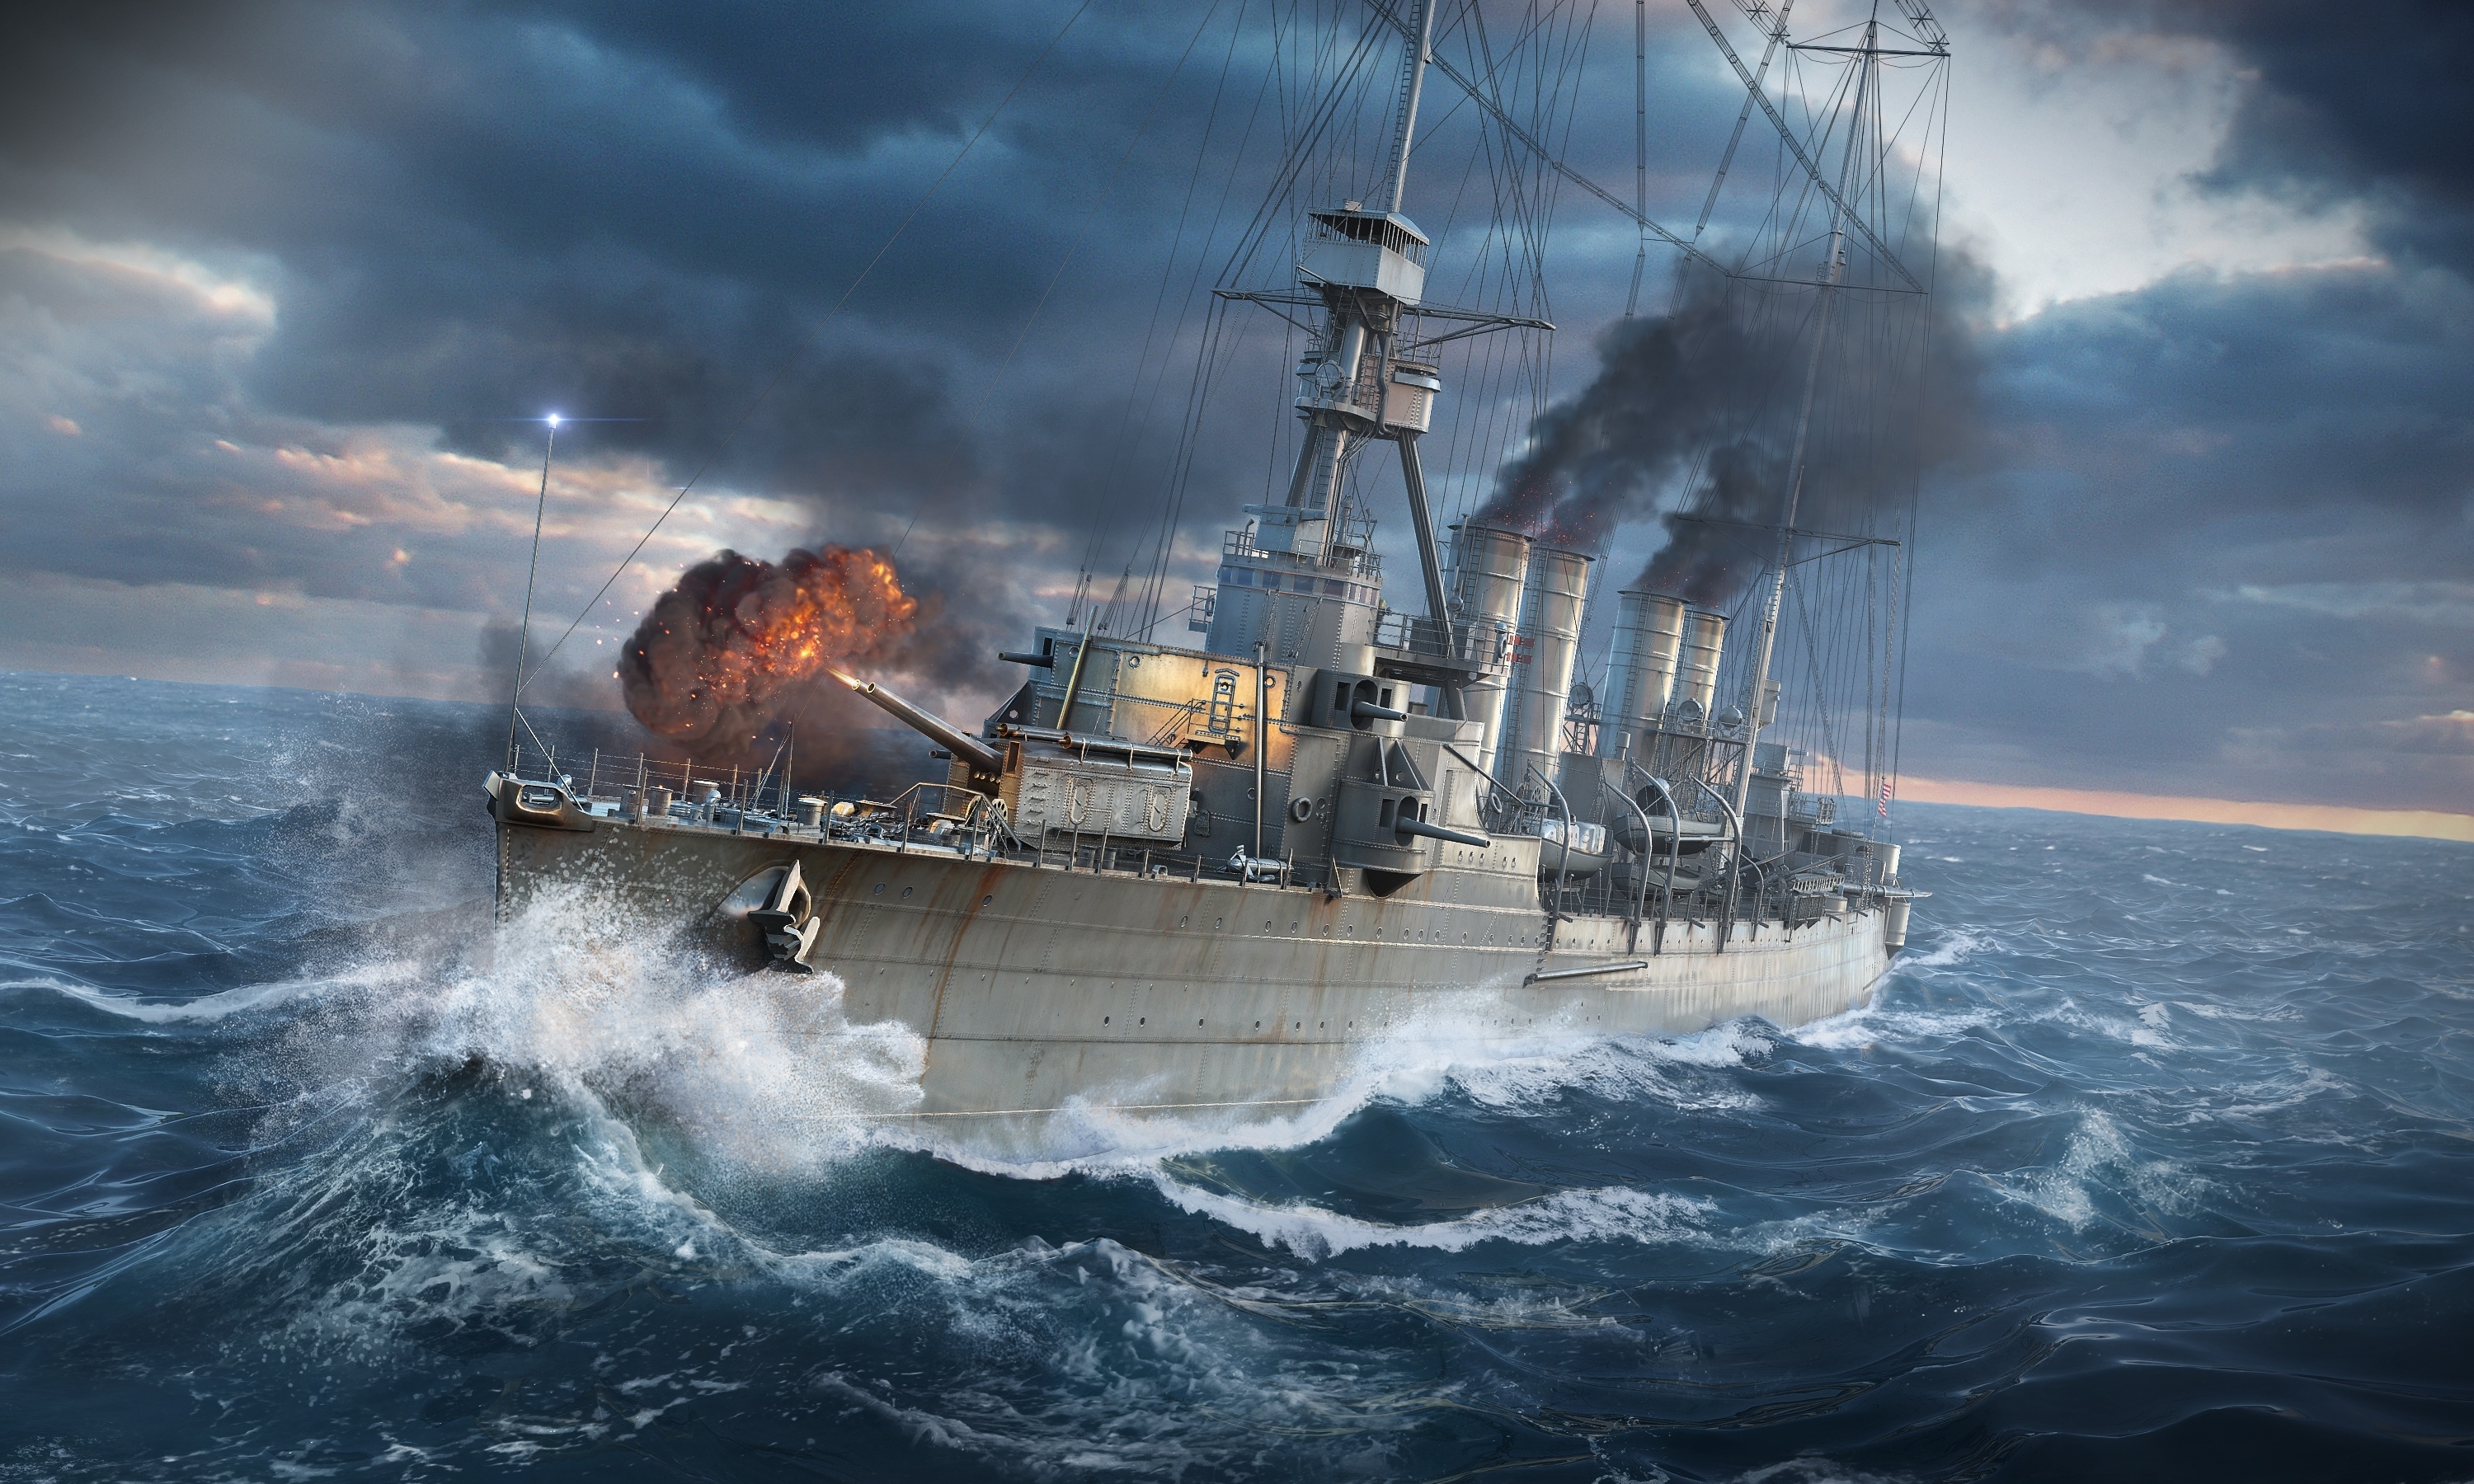 World of Warships Wallpapers  Top Free World of Warships Backgrounds   WallpaperAccess